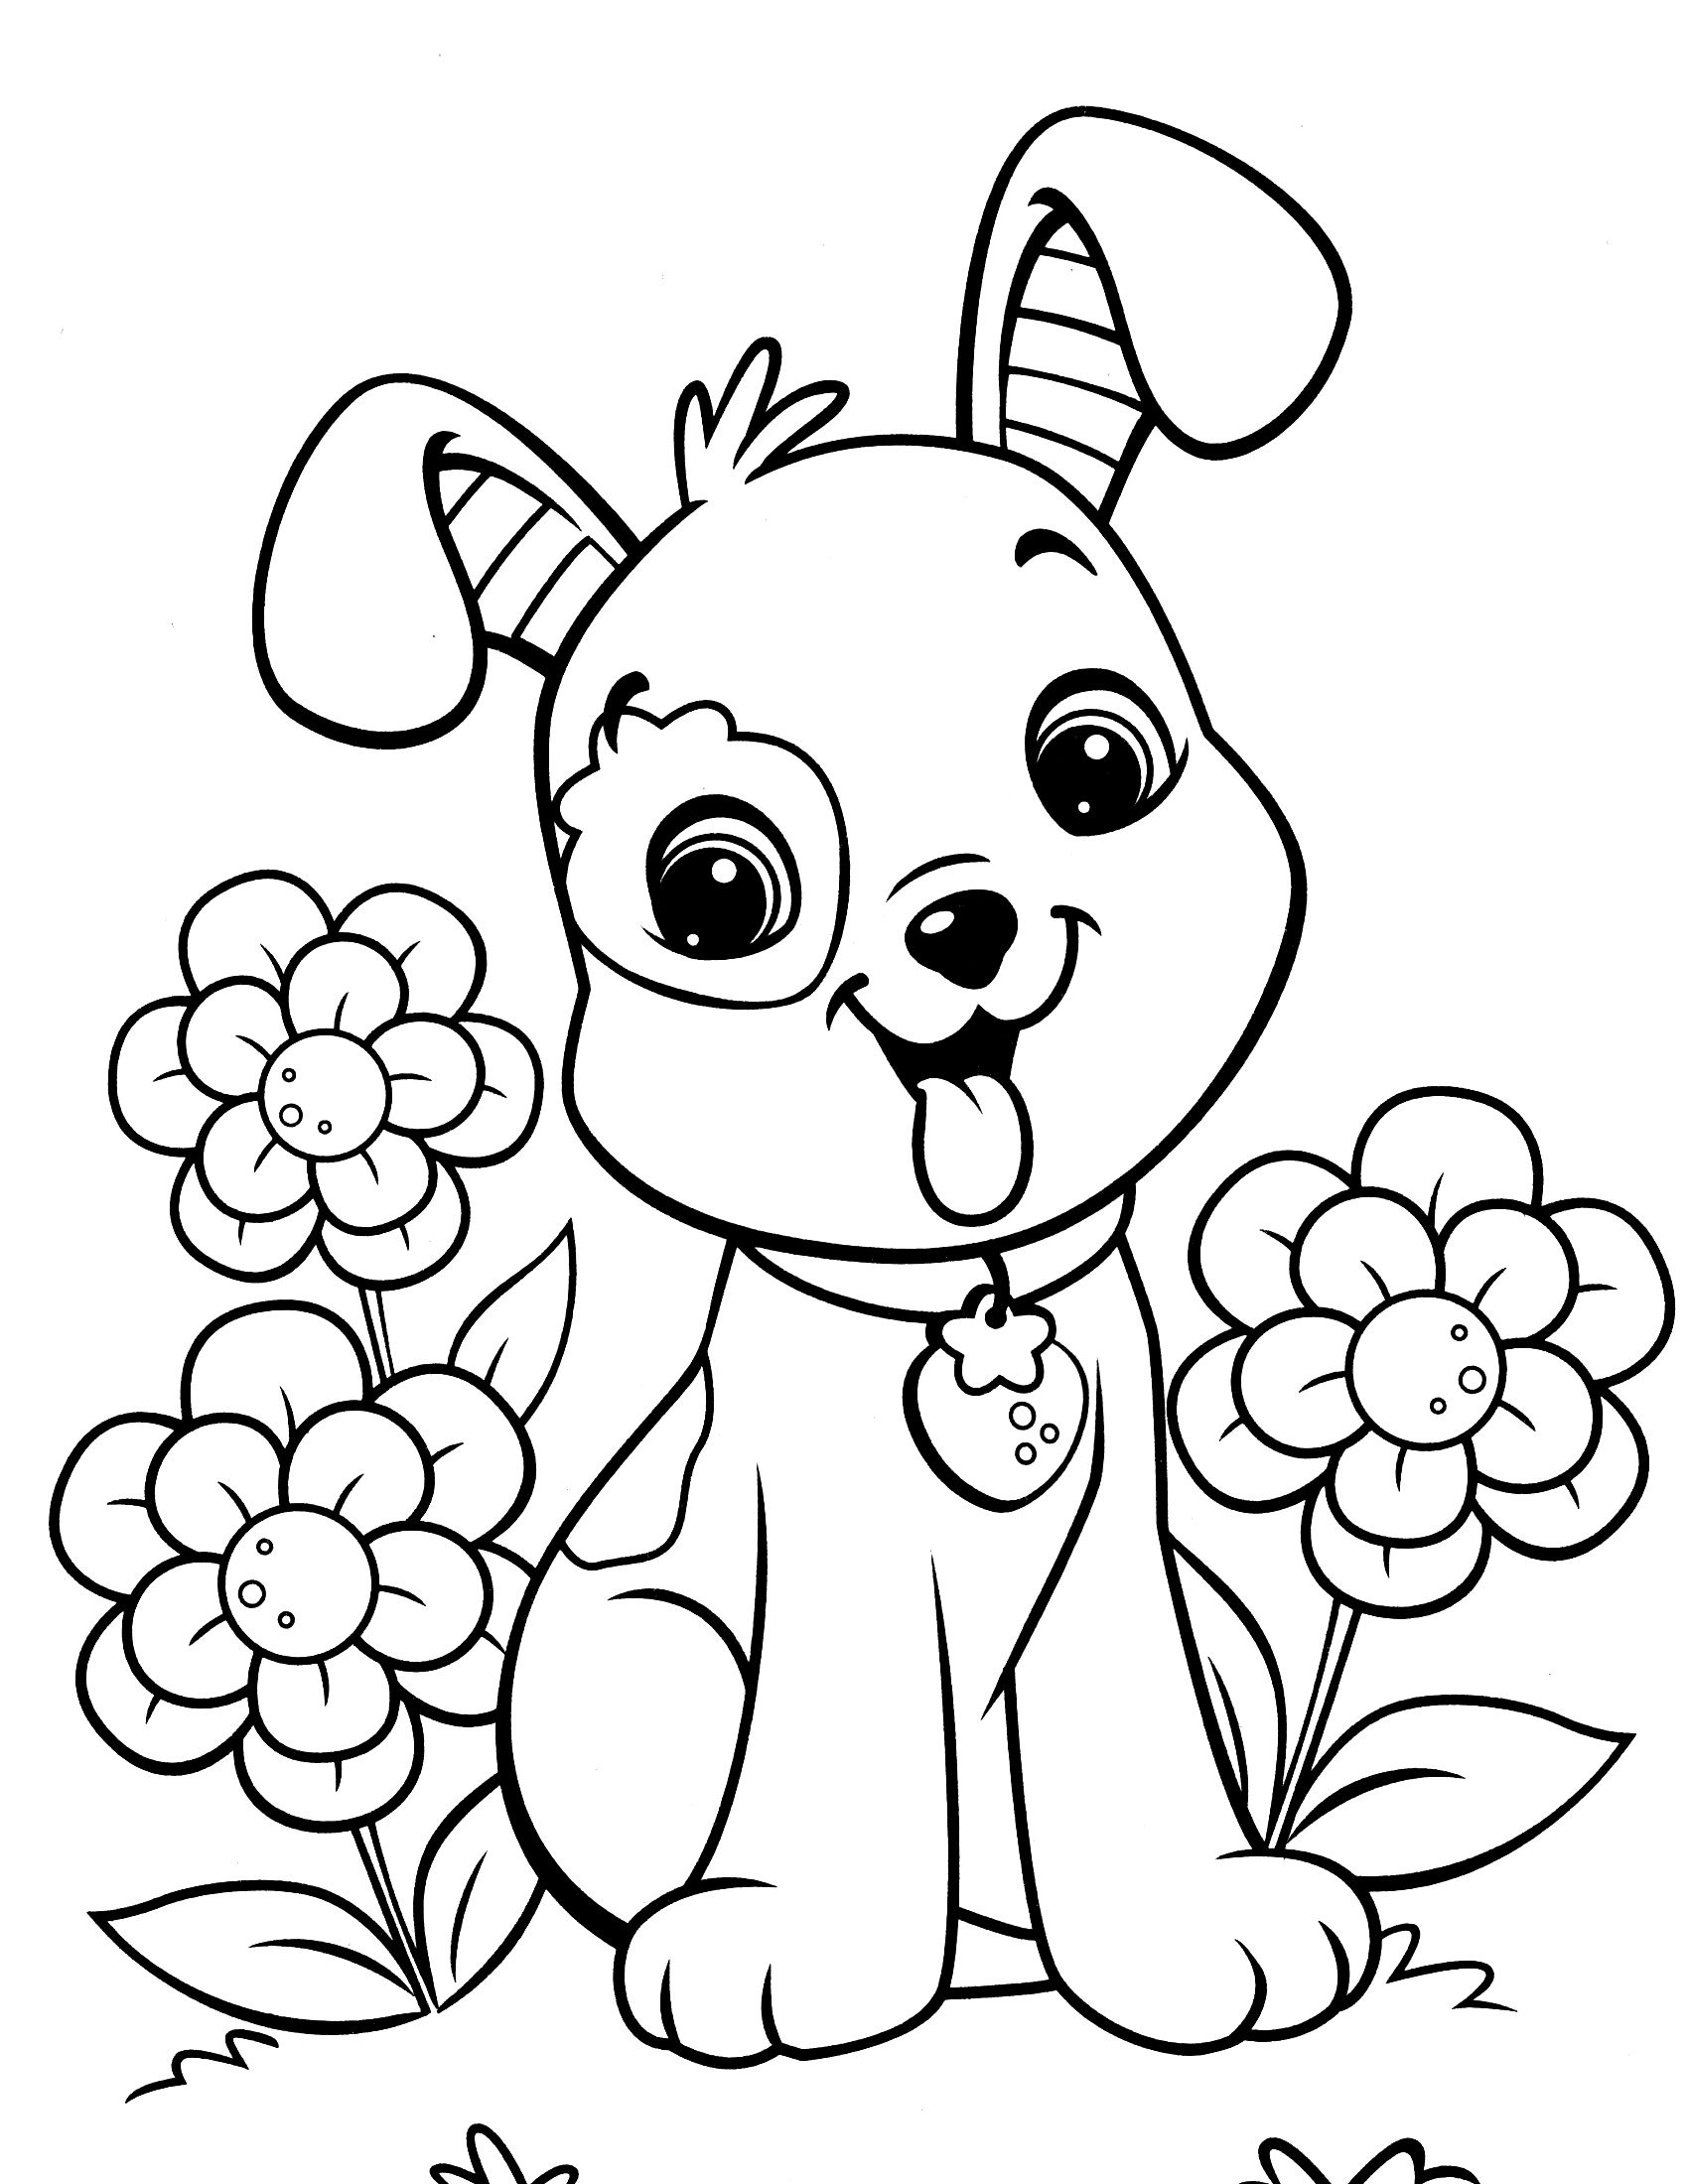 strawberry shortcake dog coloring pages